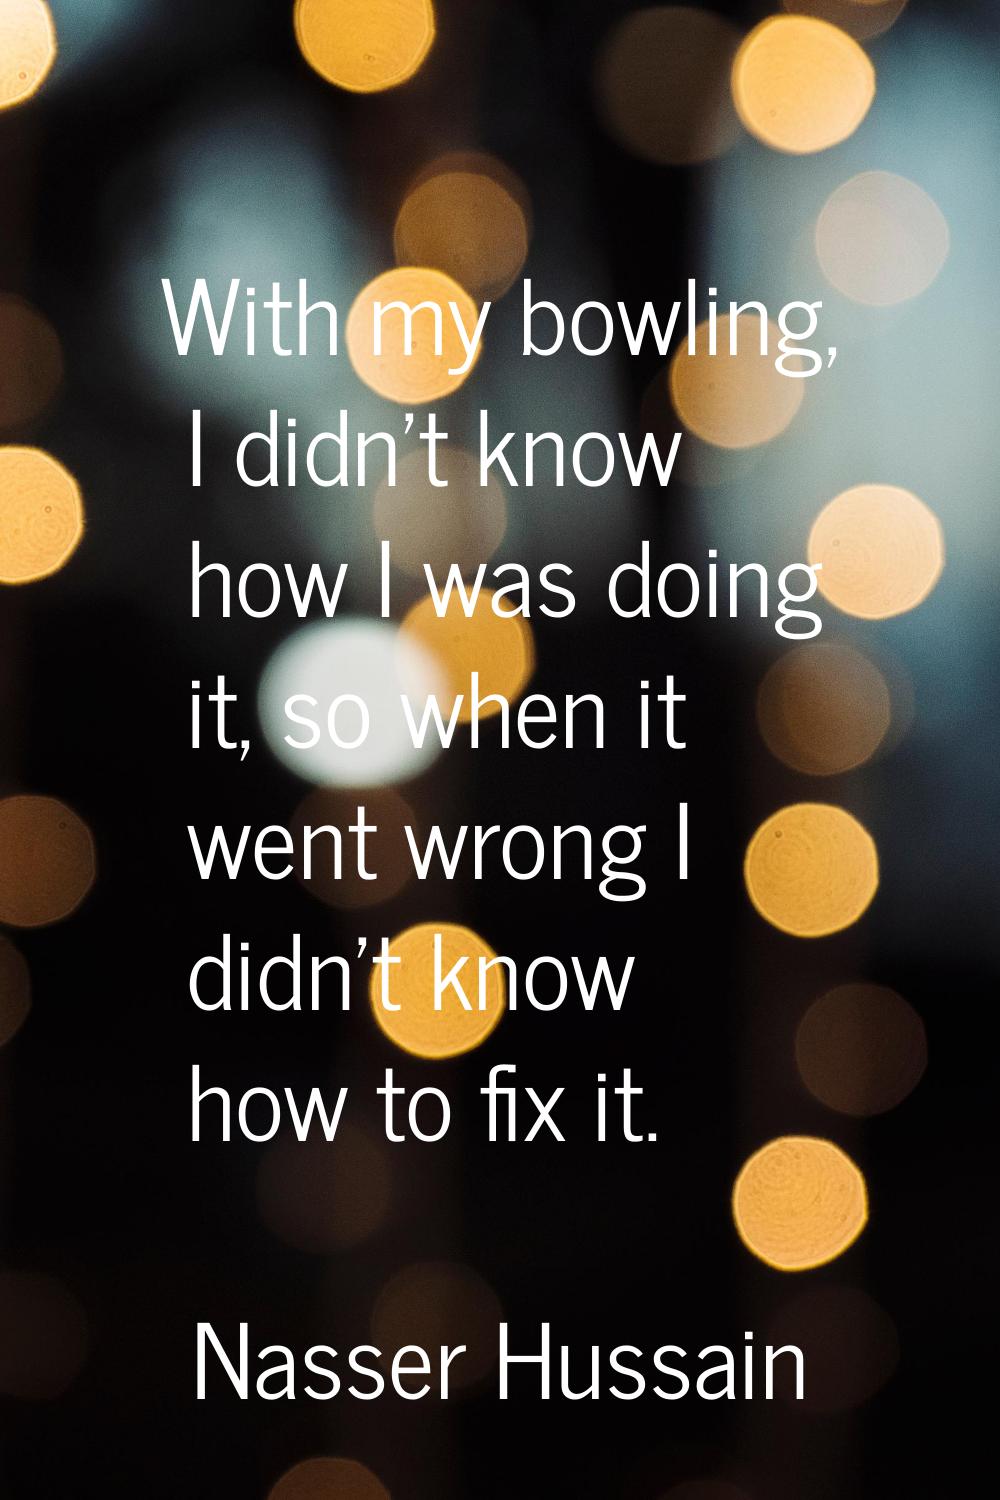 With my bowling, I didn't know how I was doing it, so when it went wrong I didn't know how to fix i